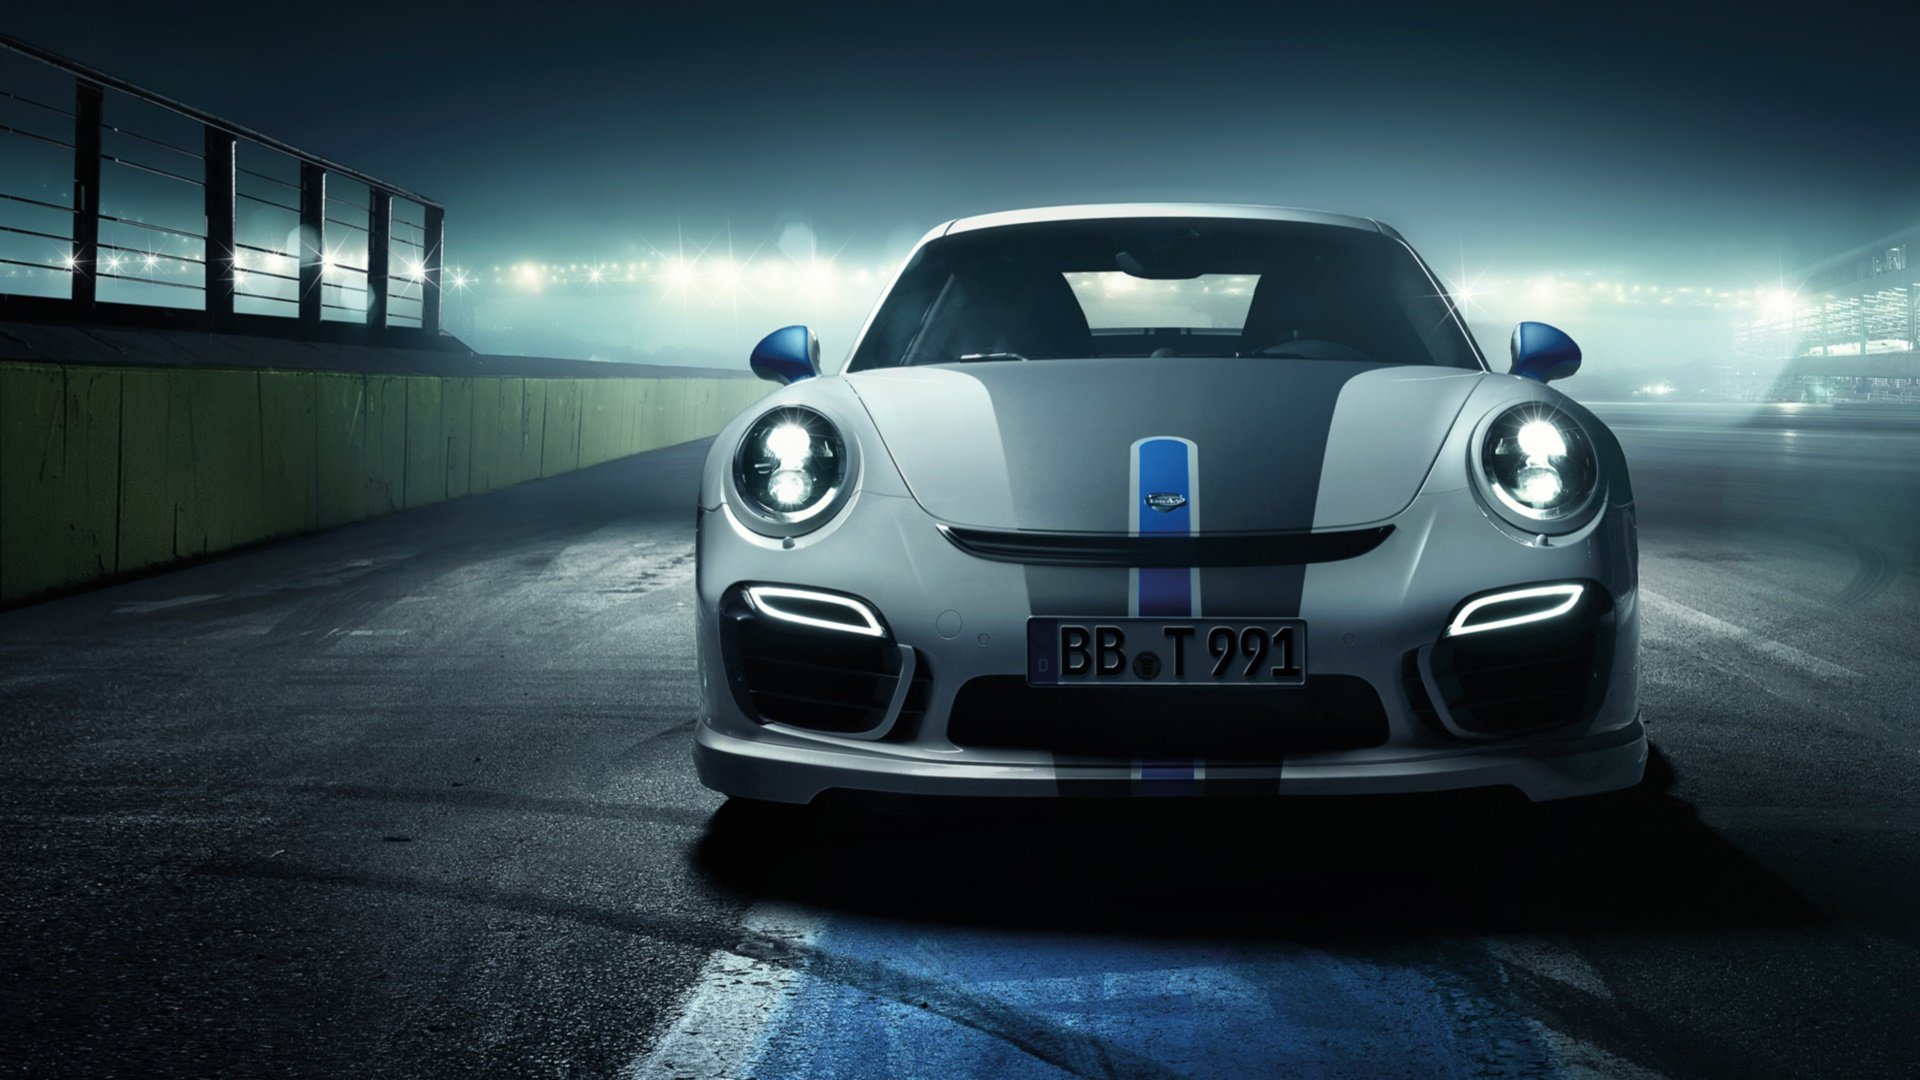 Awesome Porsche 911 Turbo free wallpaper ID:281184 for hd 1080p computer